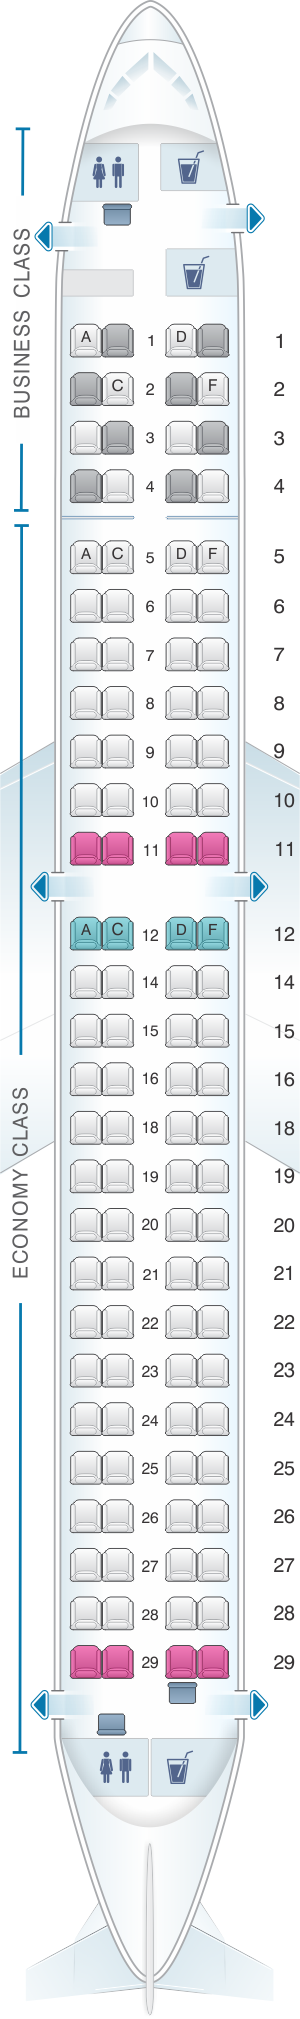 Seat map for Lufthansa Embraer E190